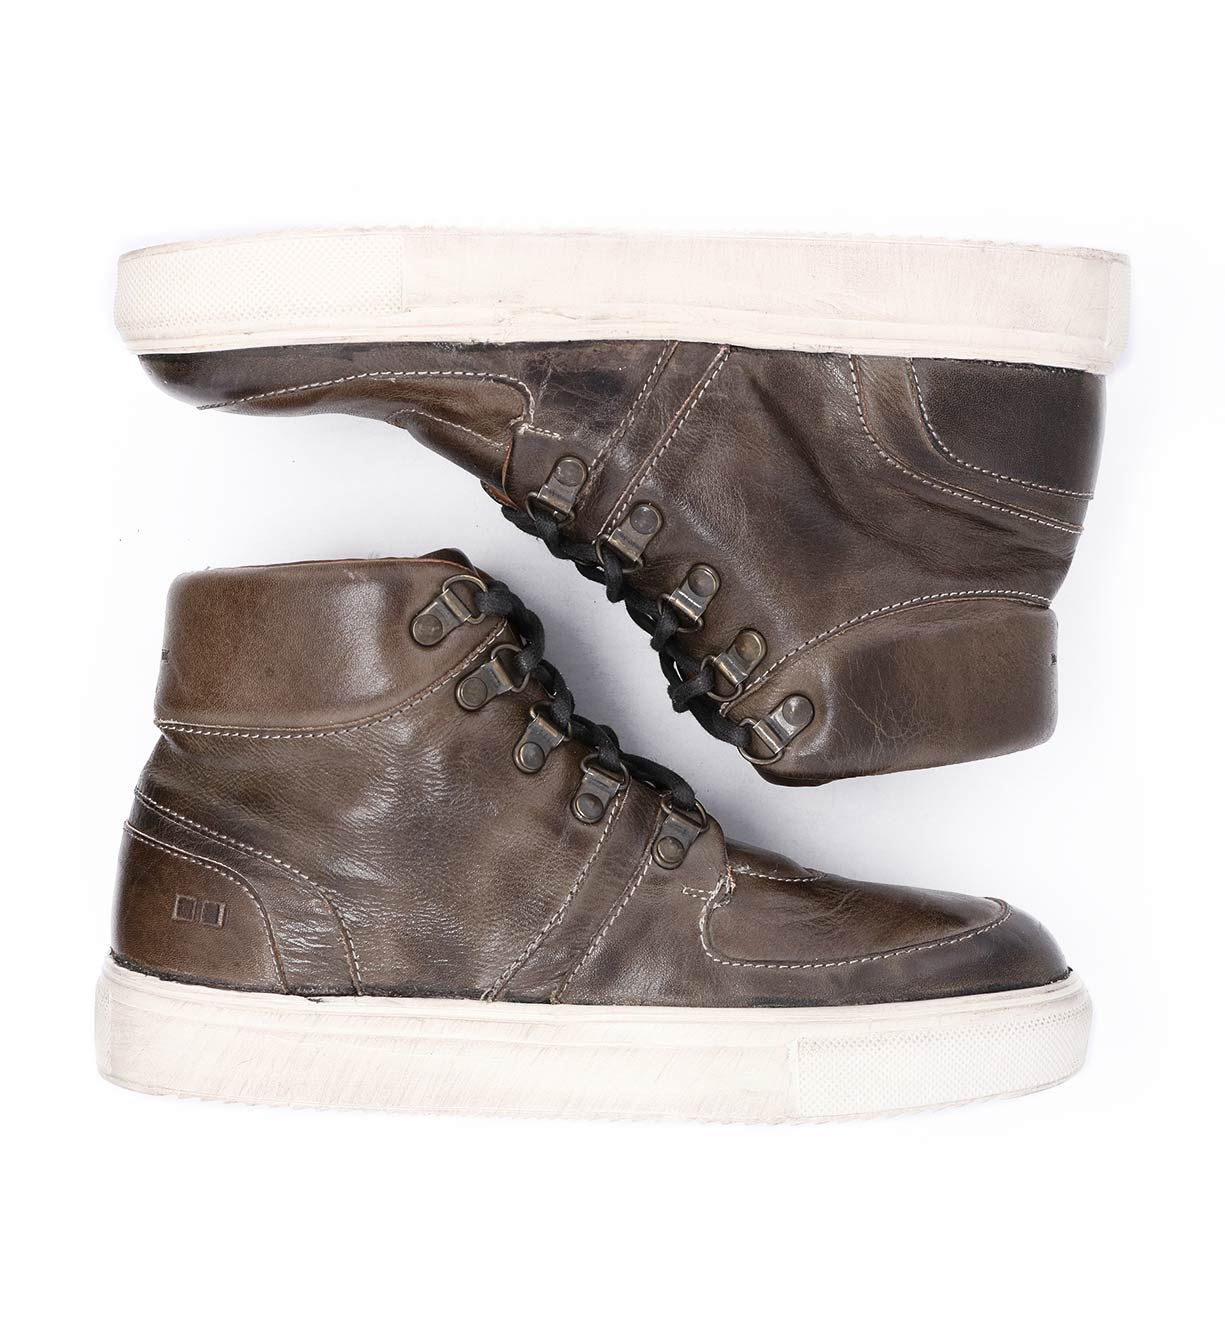 A pair of brown leather Bed Stu Honor sneakers on a white background.